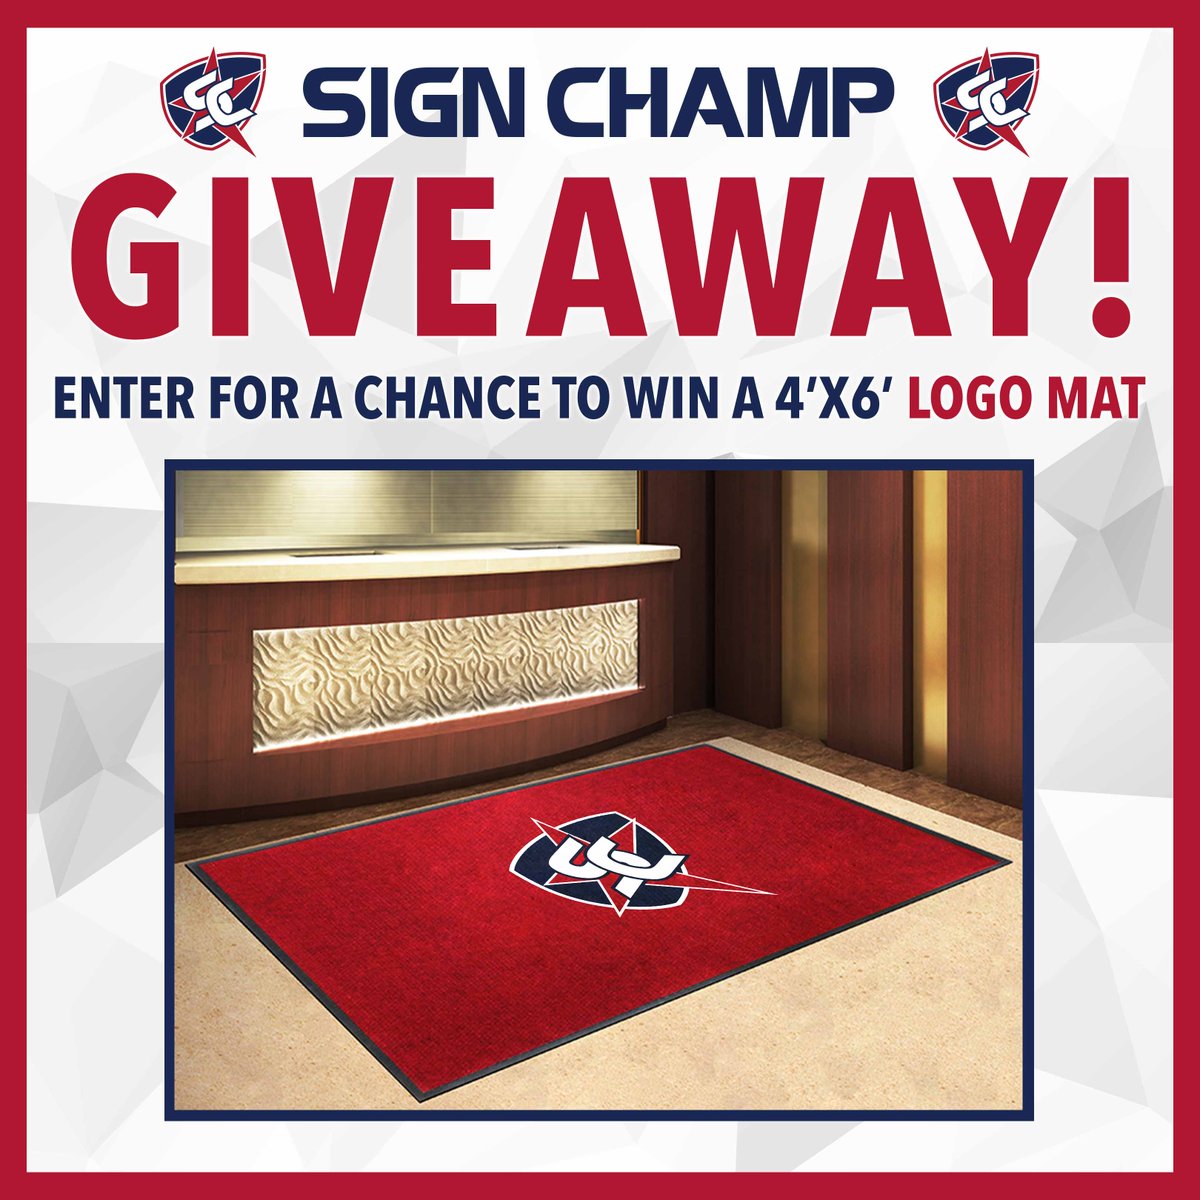 Calling all educators, coaches & school organizations! This month's giveaway is a custom 4'X6' LOGO MAT! 1⃣ Follow @TheSignChamp 2⃣📷Like and RT 3⃣ Tag another school, program or coach Giveaway ends Friday, May 17th. Winner announced Monday, May 20th.